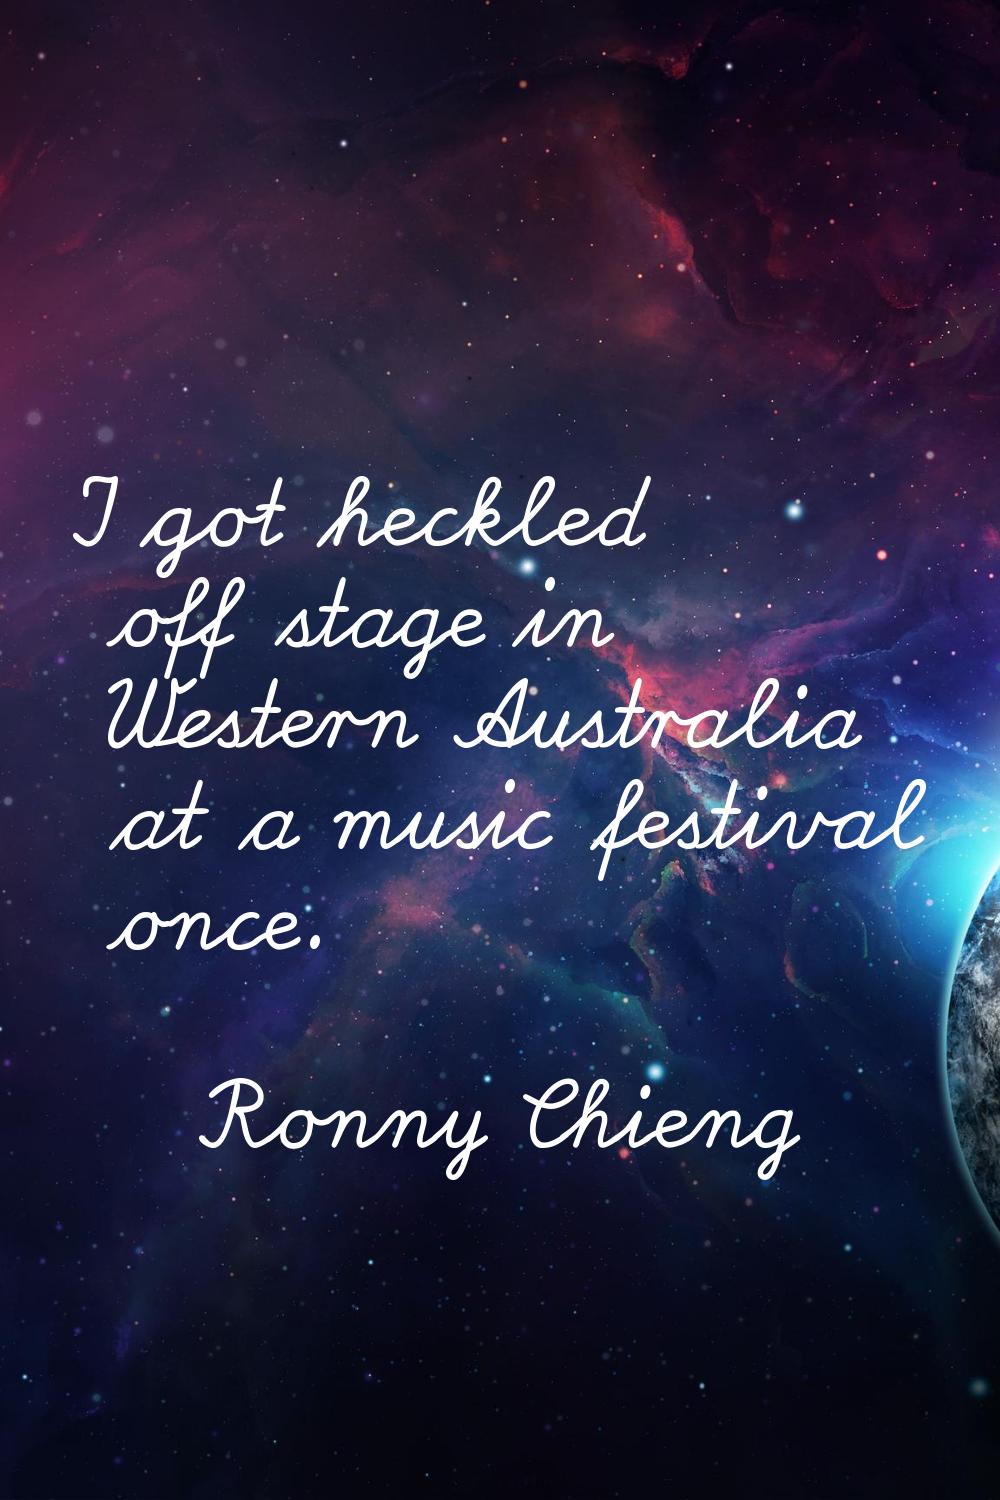 I got heckled off stage in Western Australia at a music festival once.